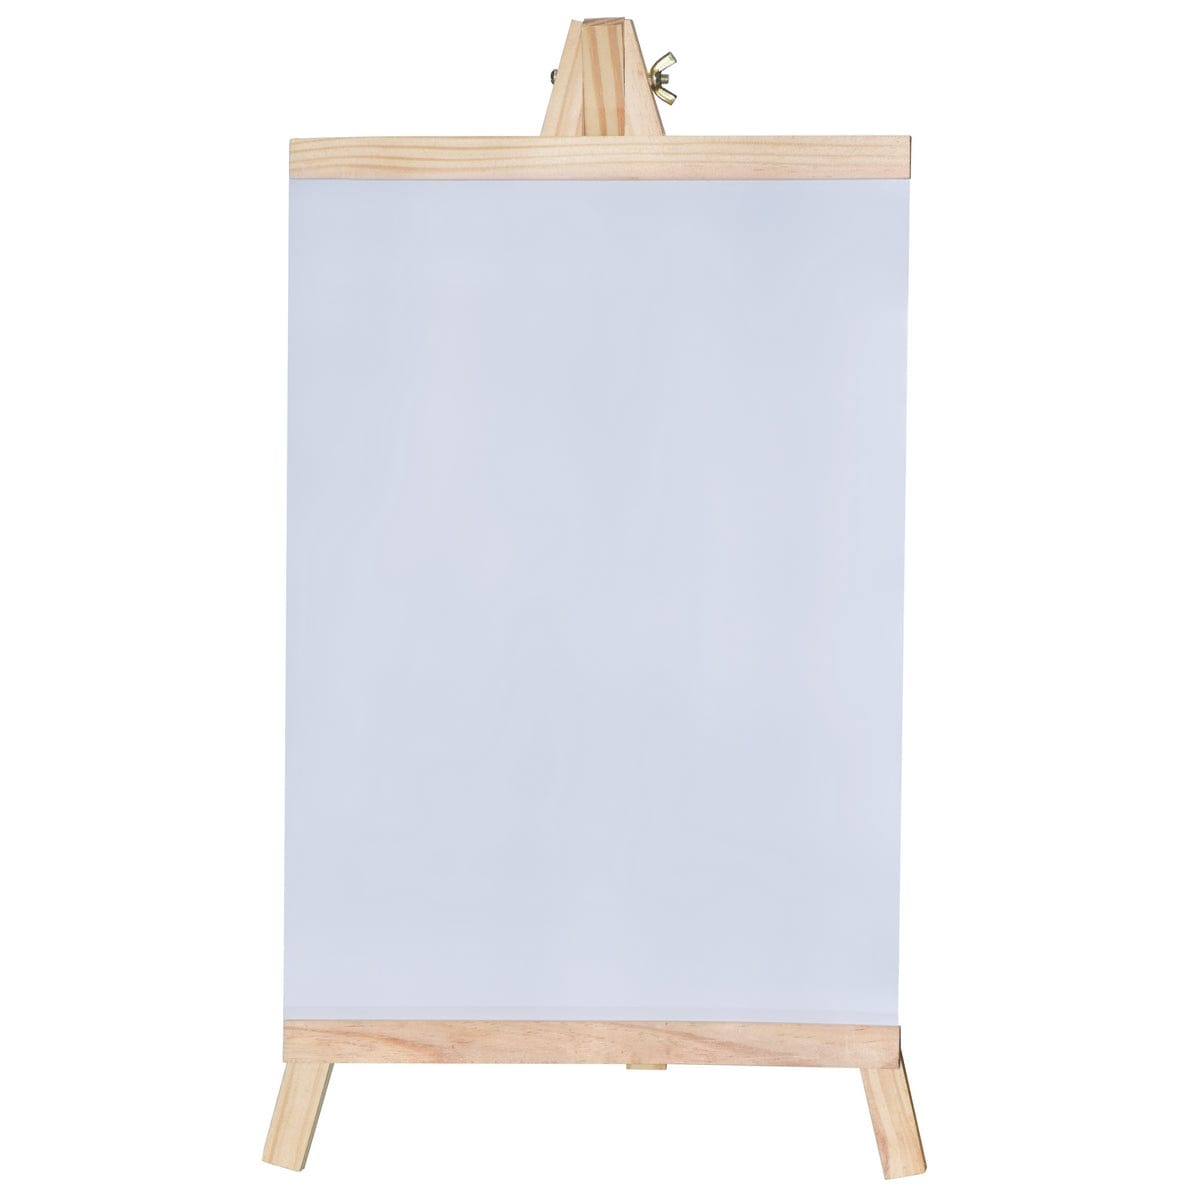 jags-mumbai Easel & Canvas Drawing Board With Easel Stand White 25x48